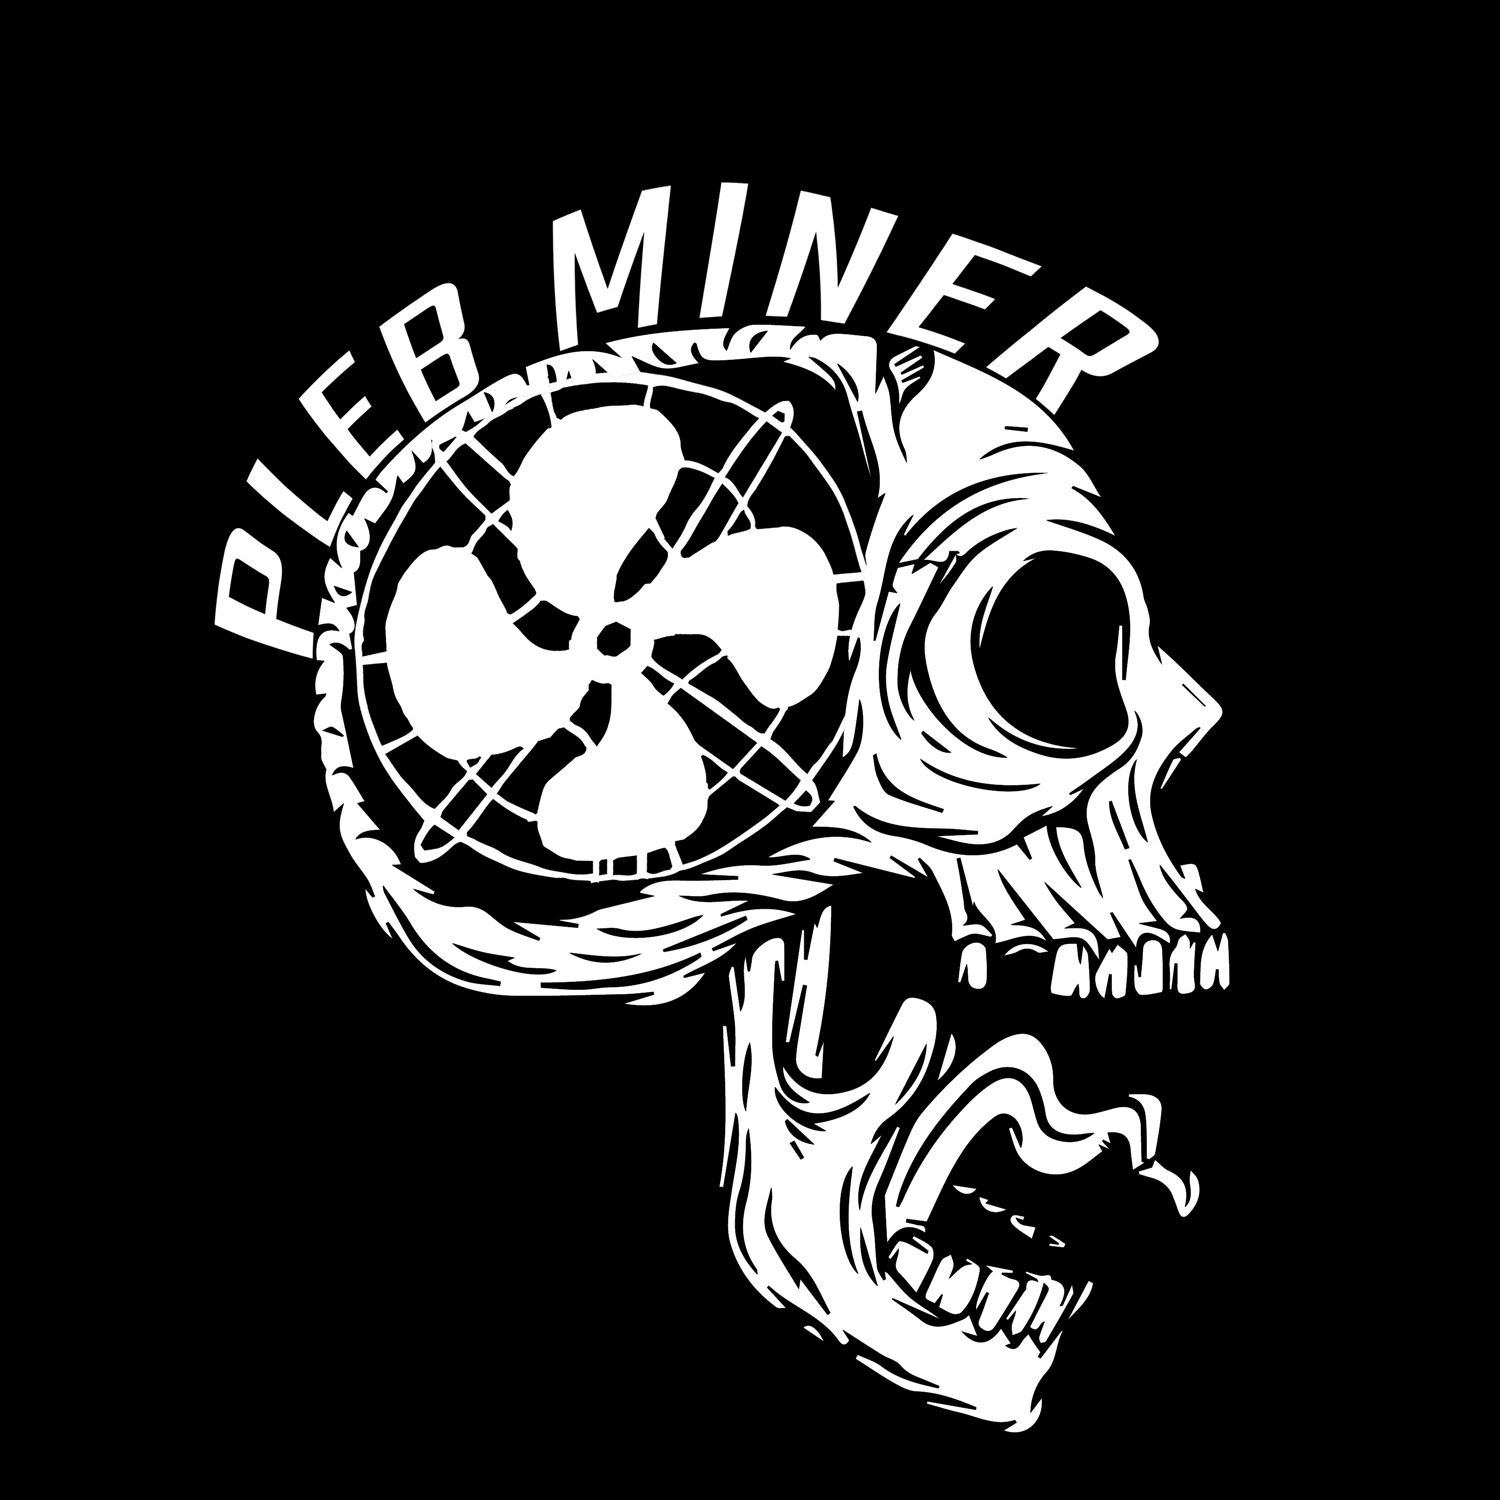 Pleb Miner Monthly EP10 Growing Centralisation of the Bitcoin Mining Sector.